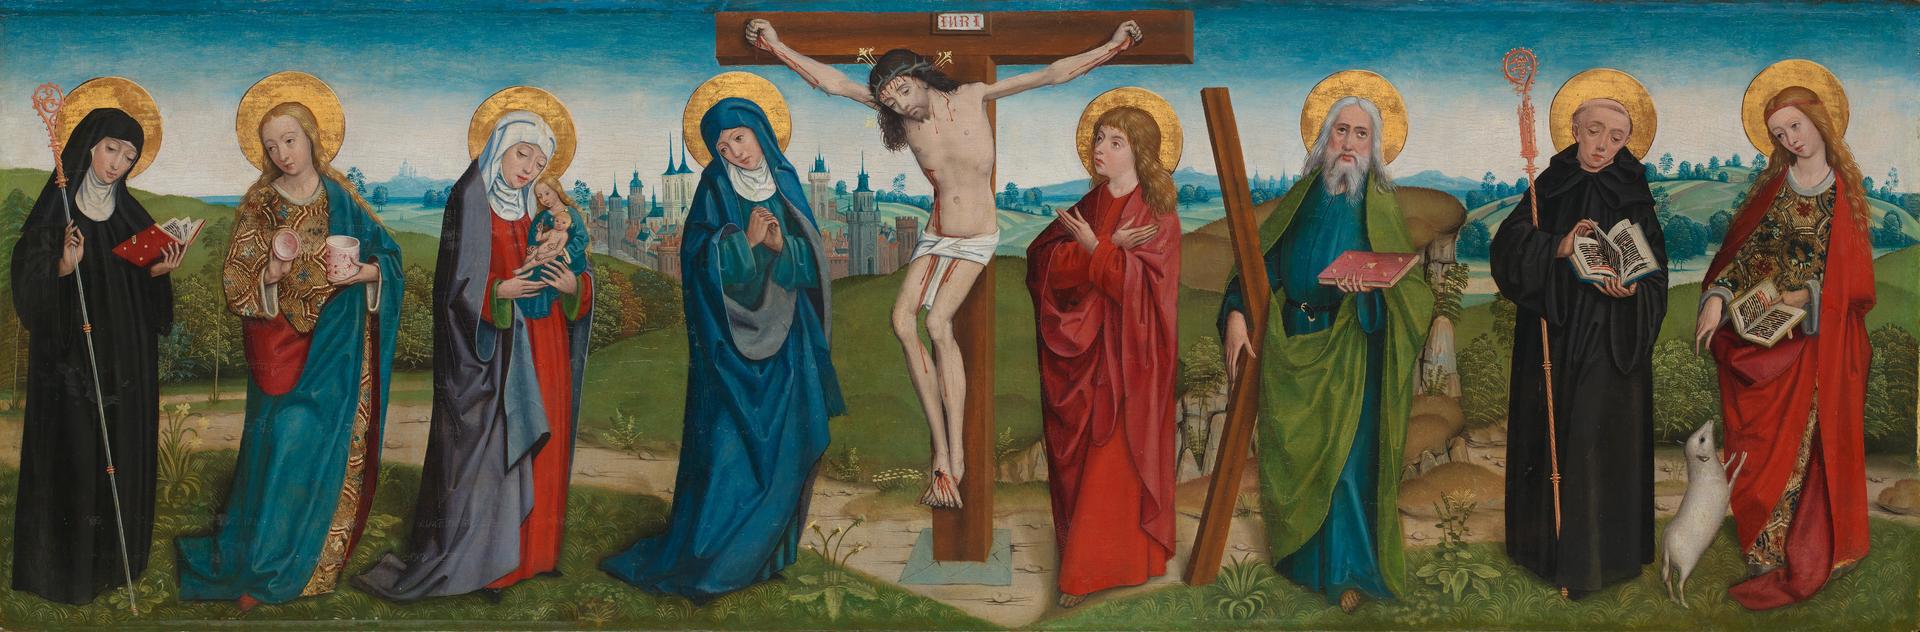 The Crucifixion with Saints by Probably by the Master of Liesborn